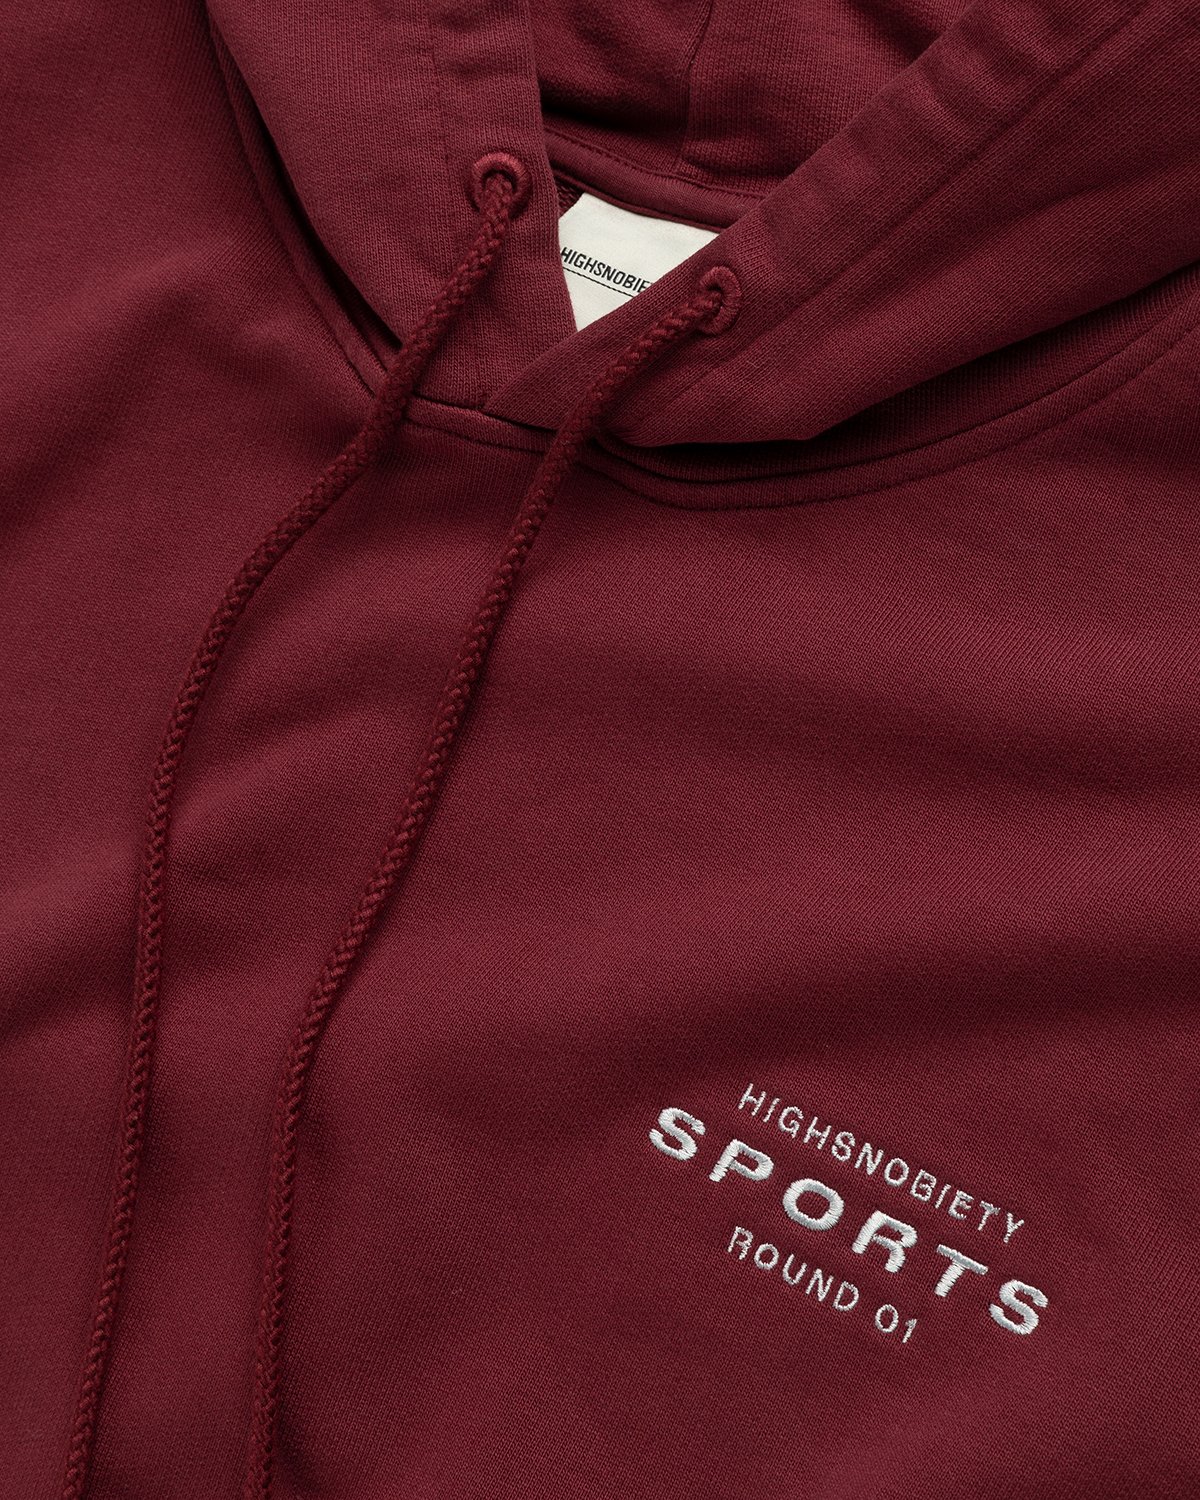 Highsnobiety - HS Sports Focus Hoodie Bordeaux - Clothing - Red - Image 3